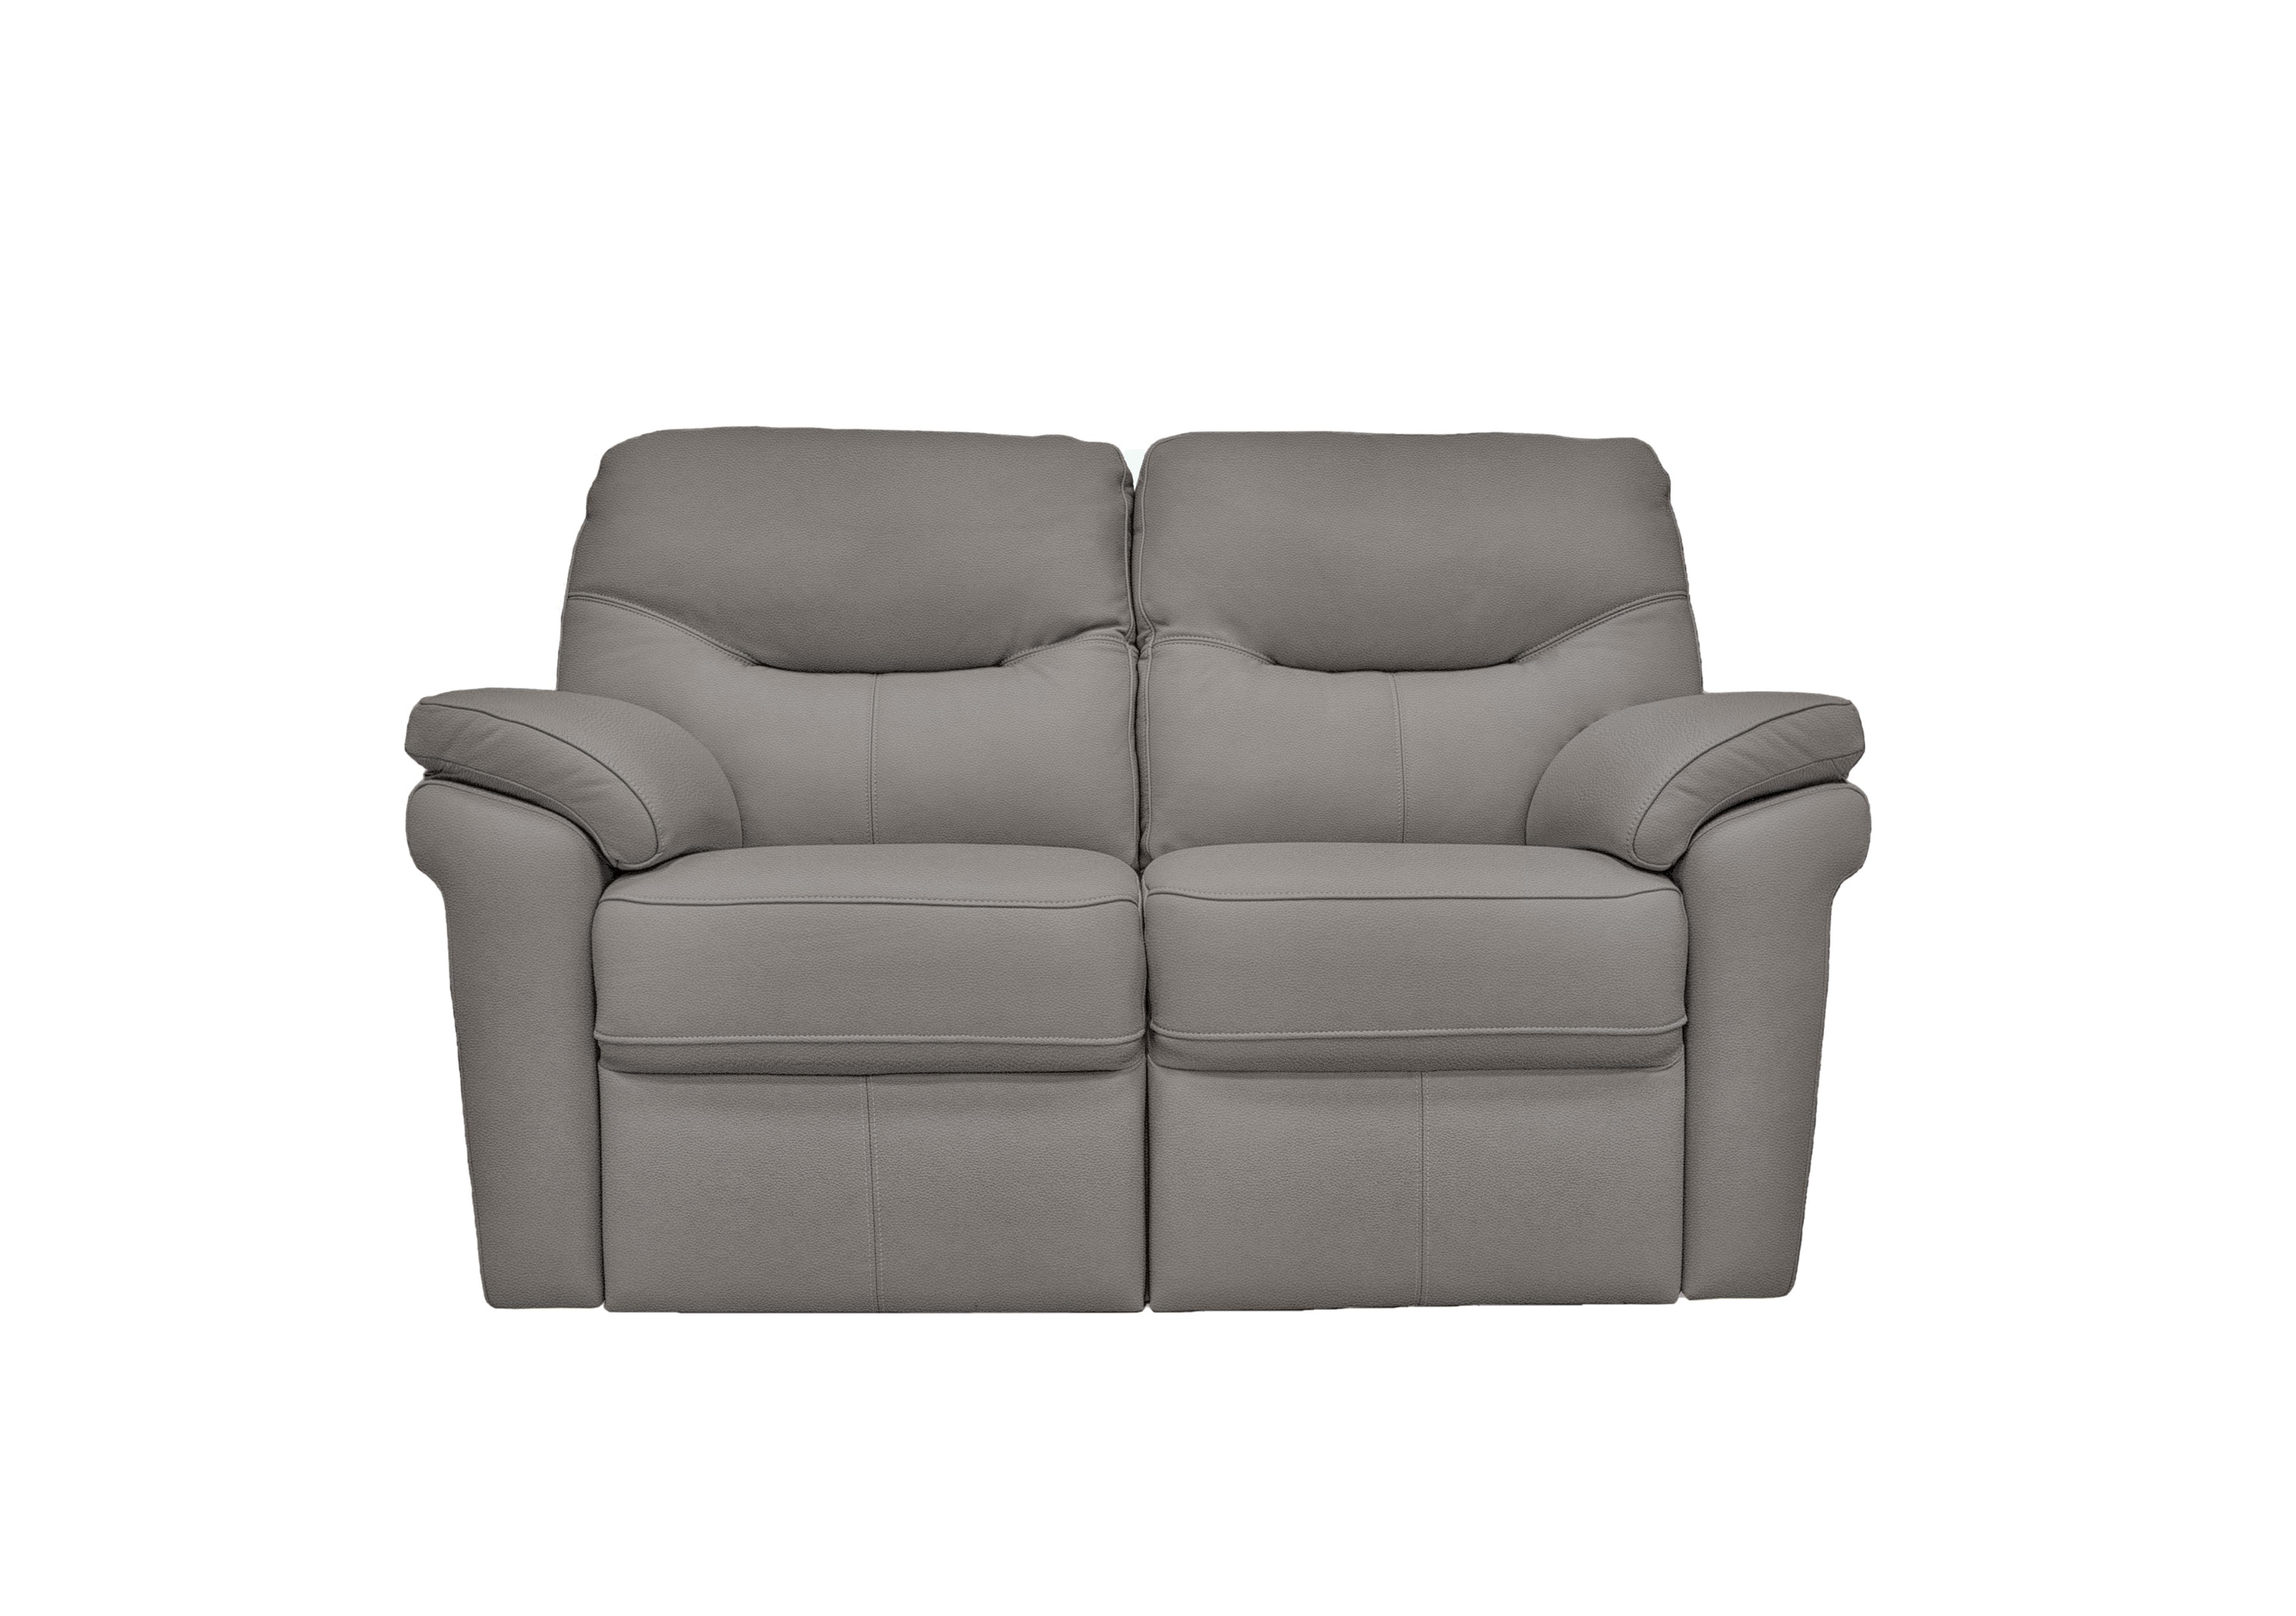 Seattle 2 Seater Leather Power Recliner Sofa with Power Lumbar in L842 Cambridge Grey on Furniture Village